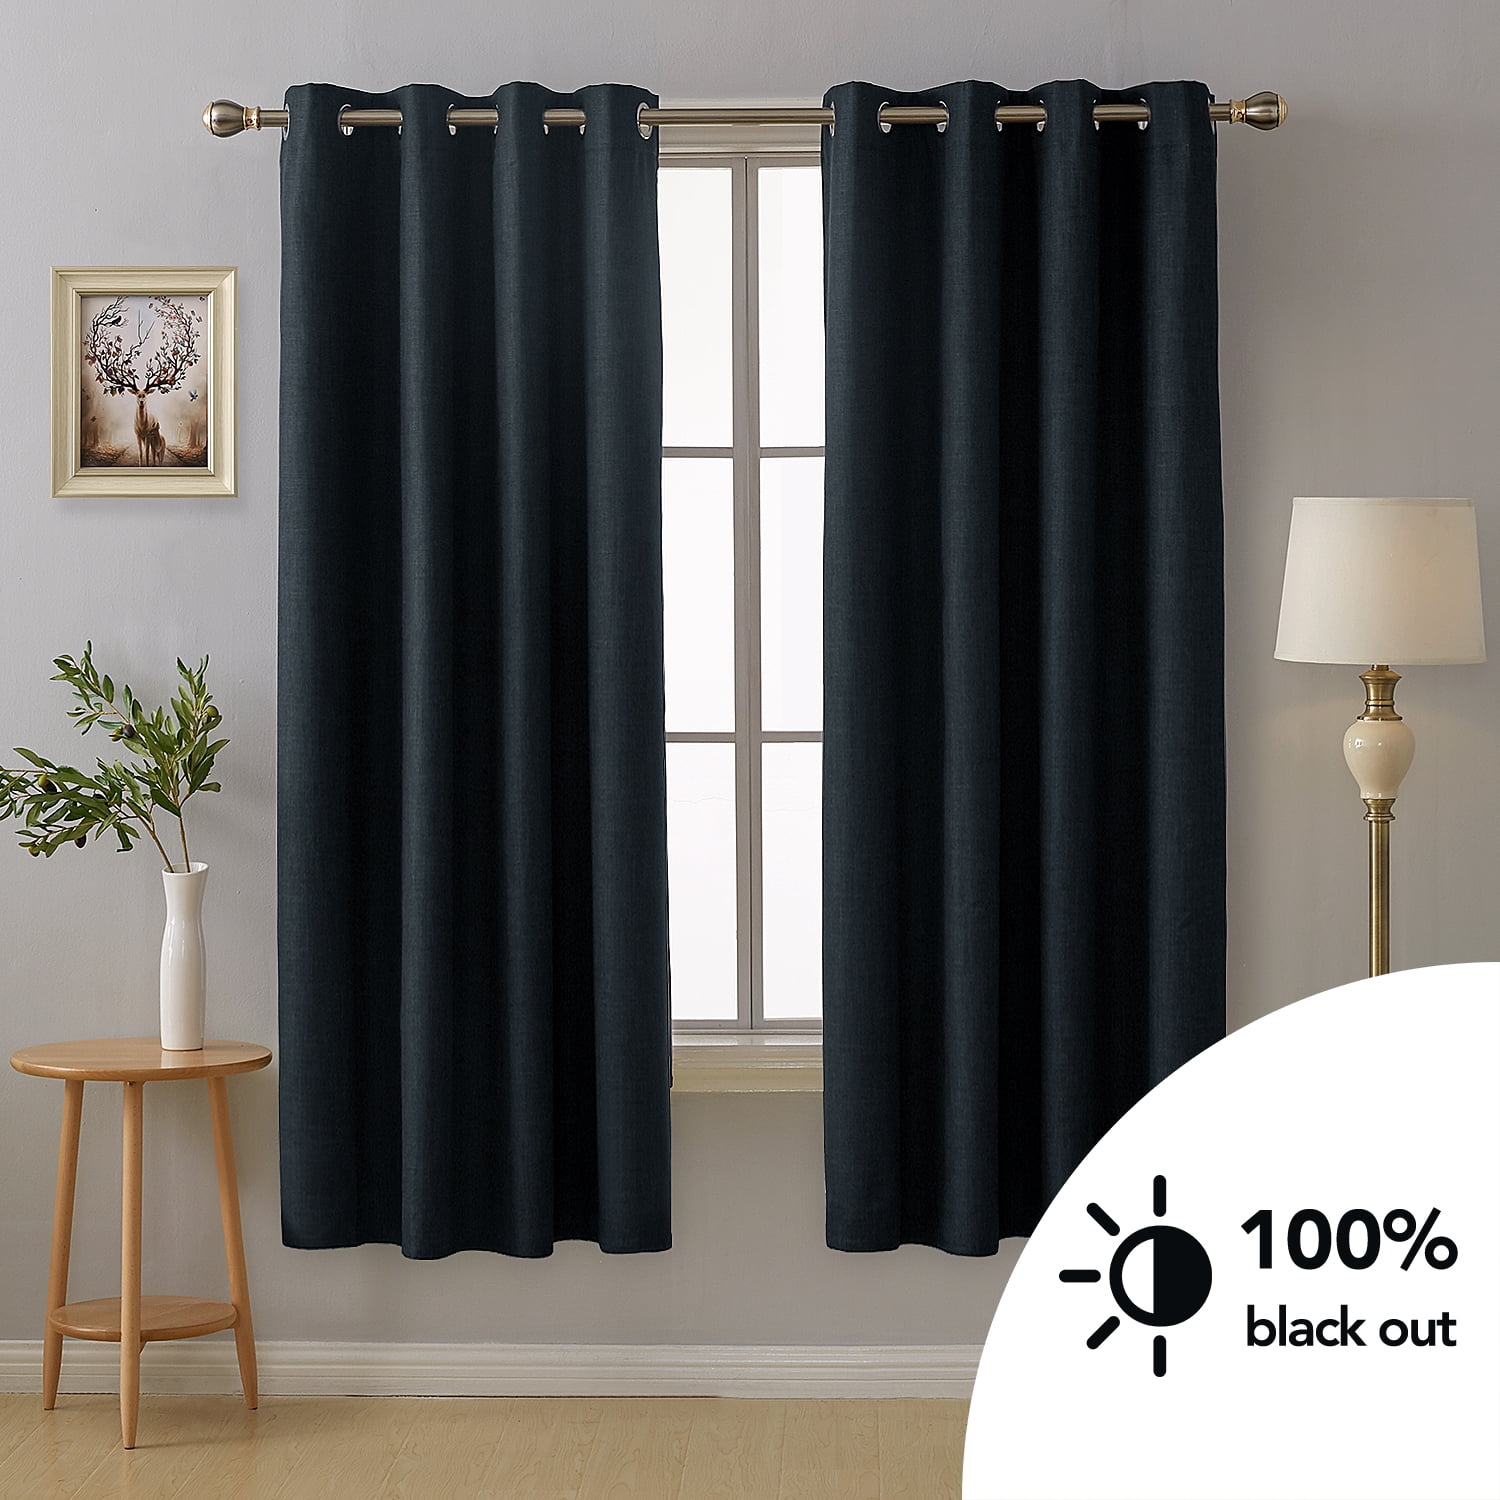 Deconovo Blackout Curtains for Bedroom, Silver Dots Printed Pattern (52W x  95L inch, Black, 2 Panels) 